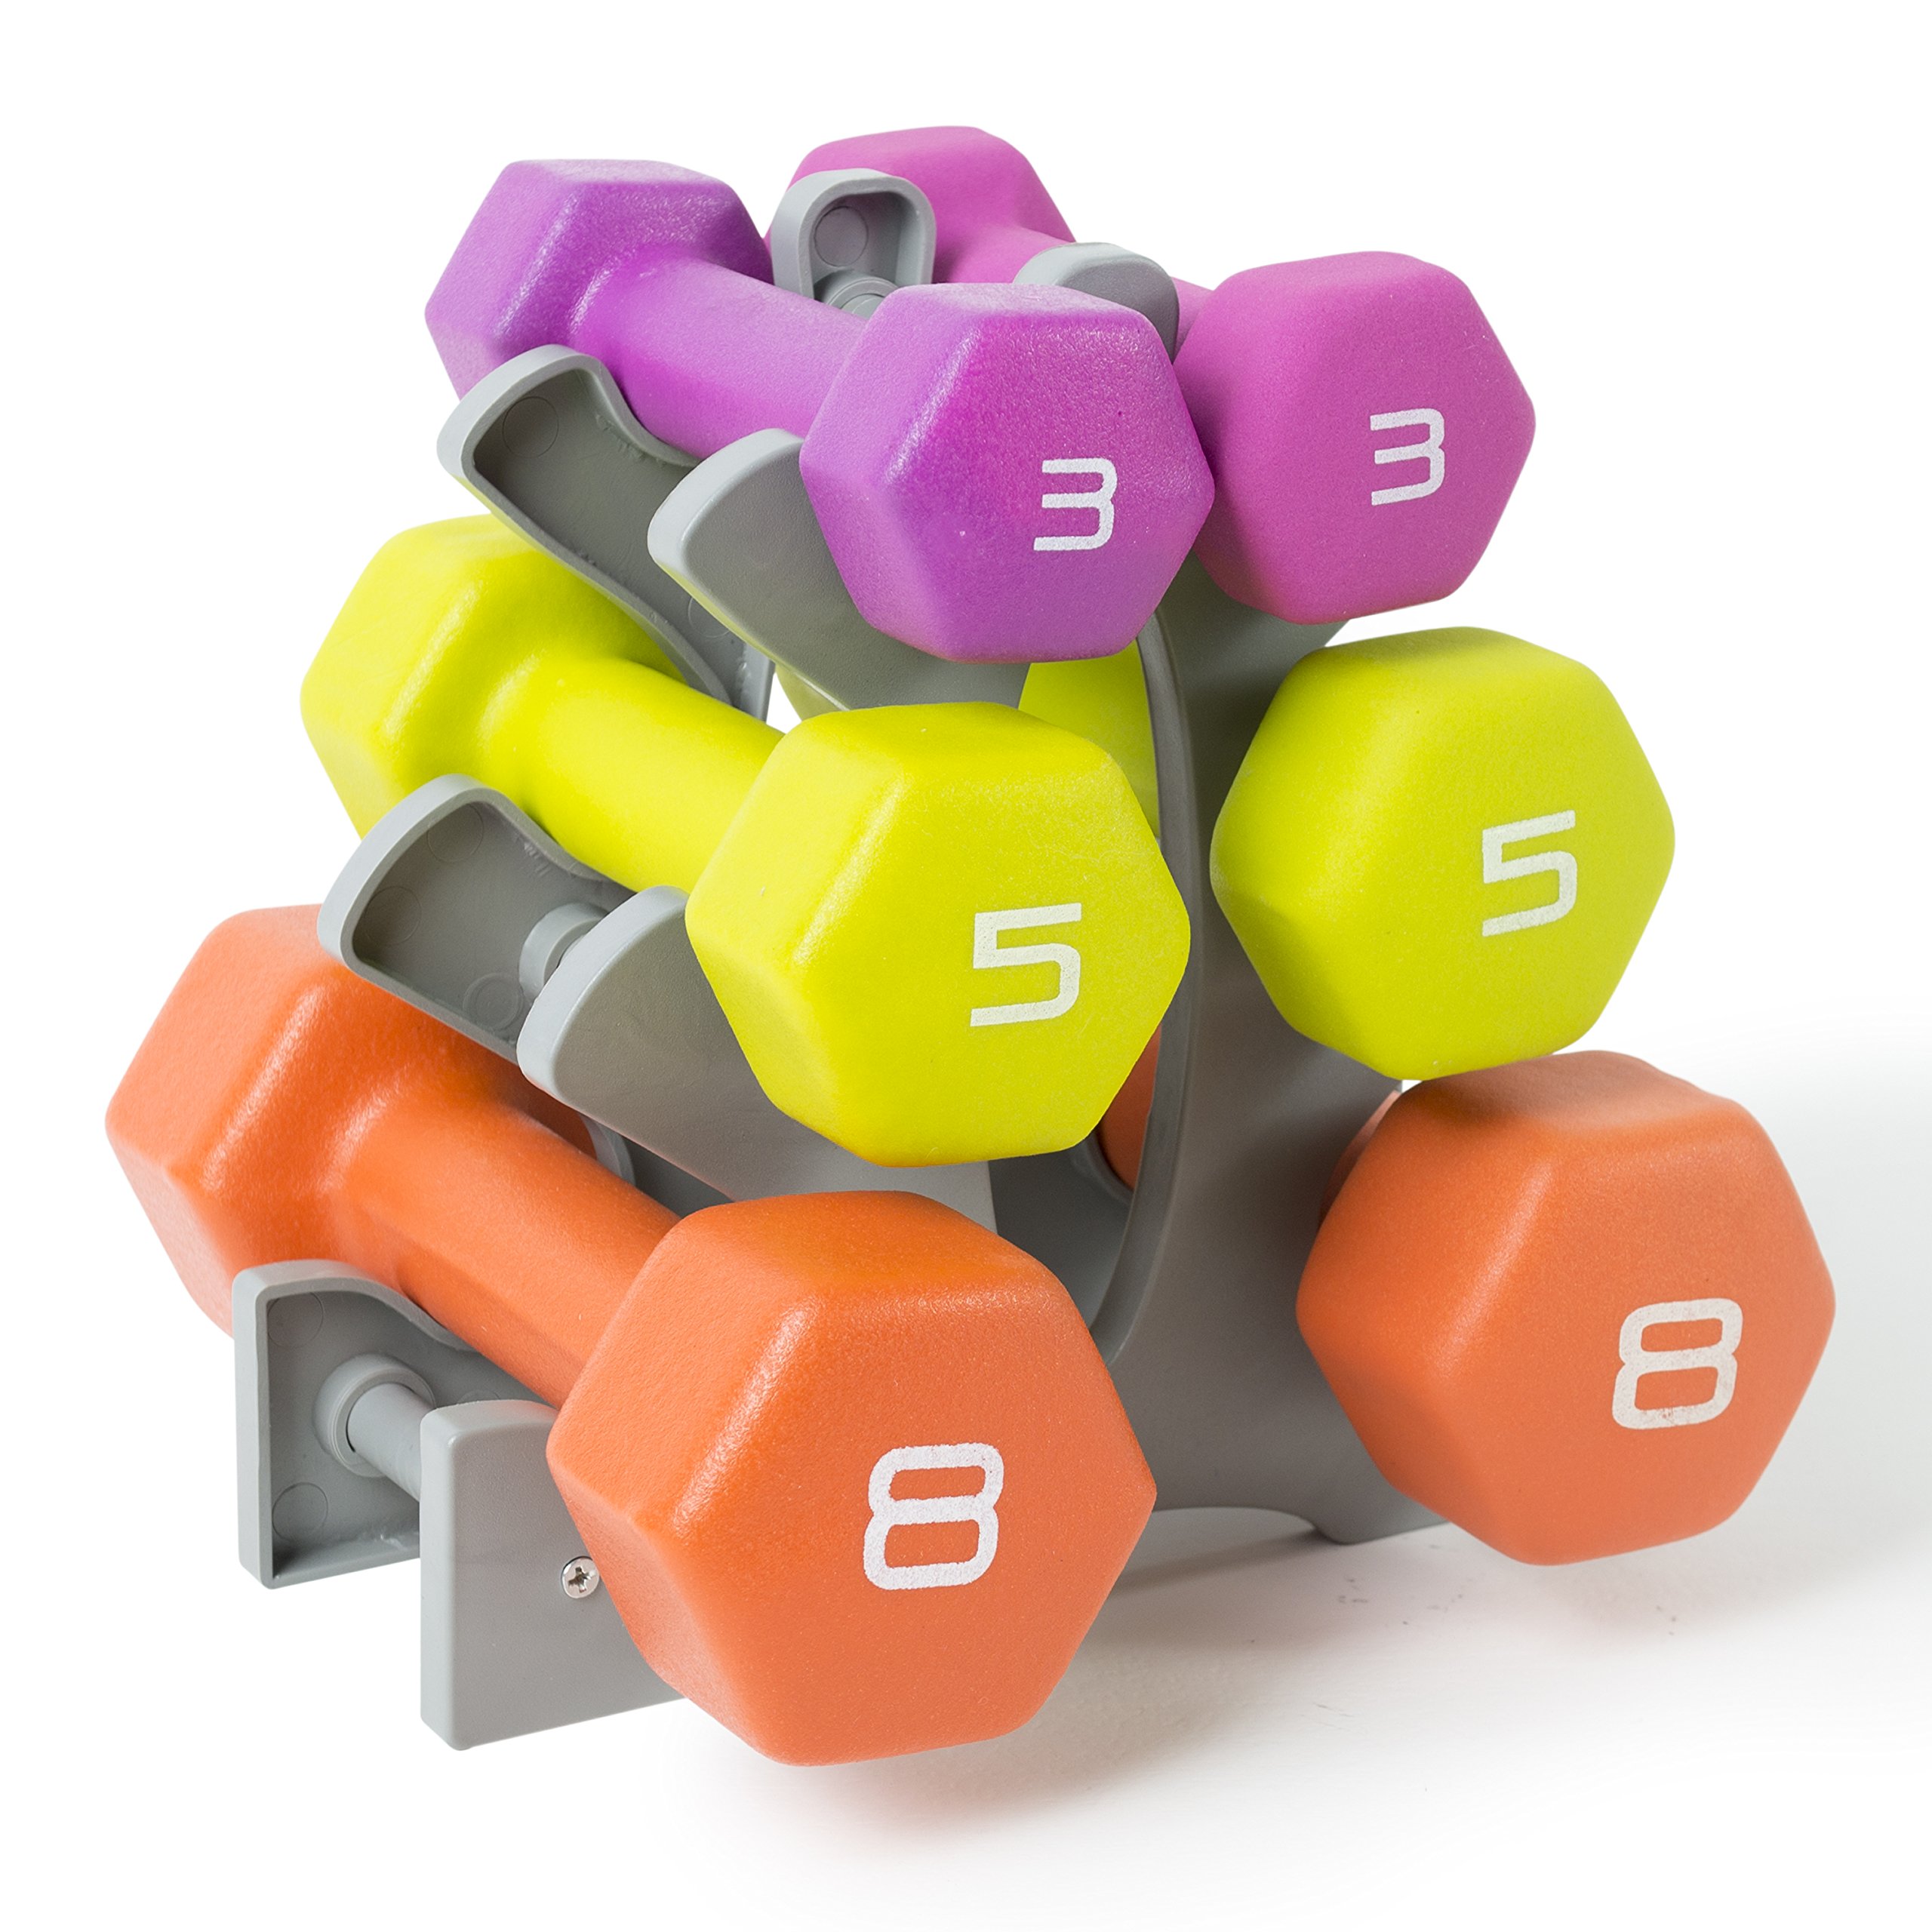 Tone Fitness set includes 3 PAIRS of DUMBBELLS